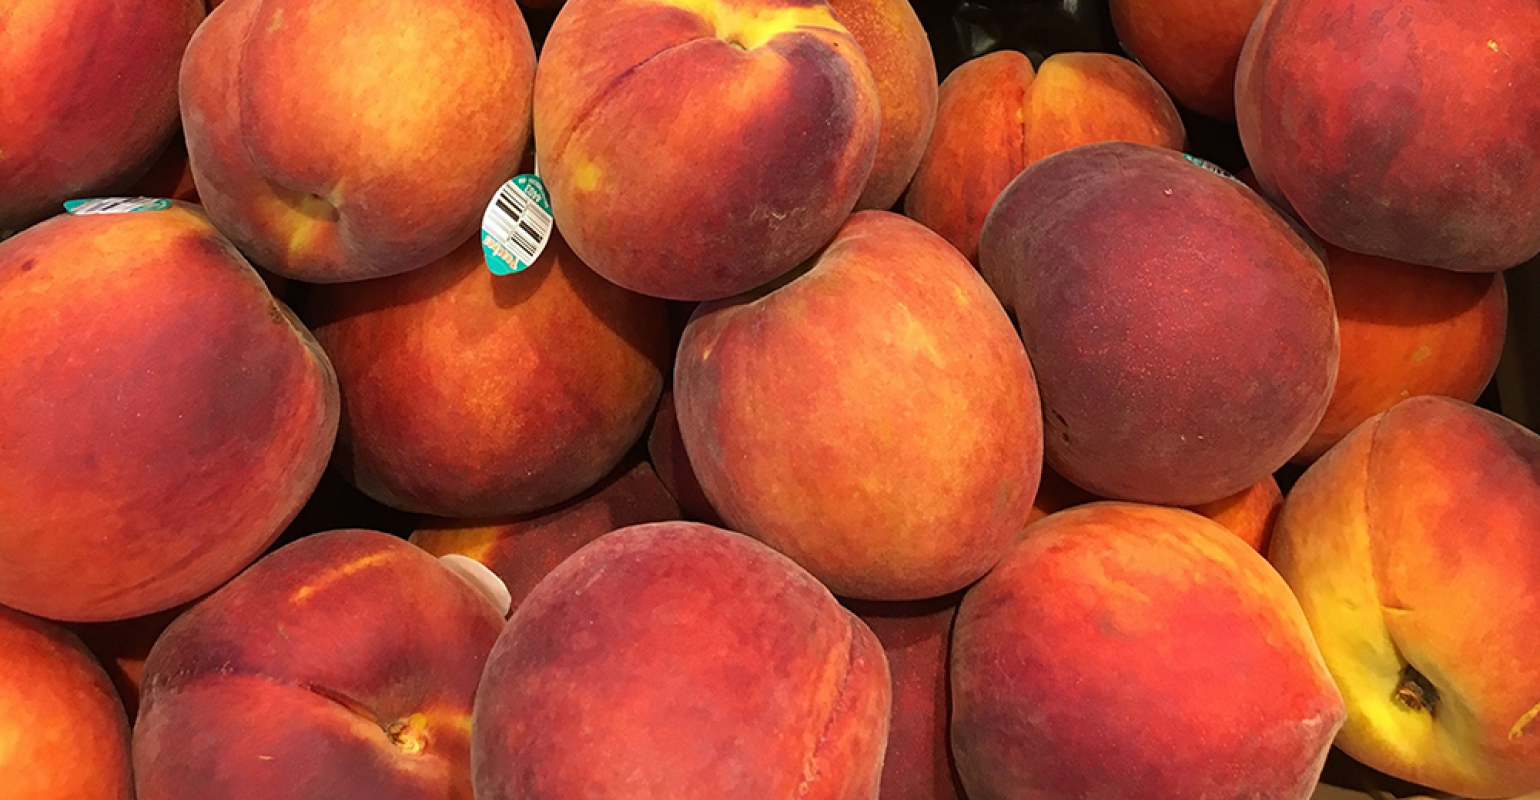 Fresh fruit recall hits grocery retailers in 18 states Supermarket News